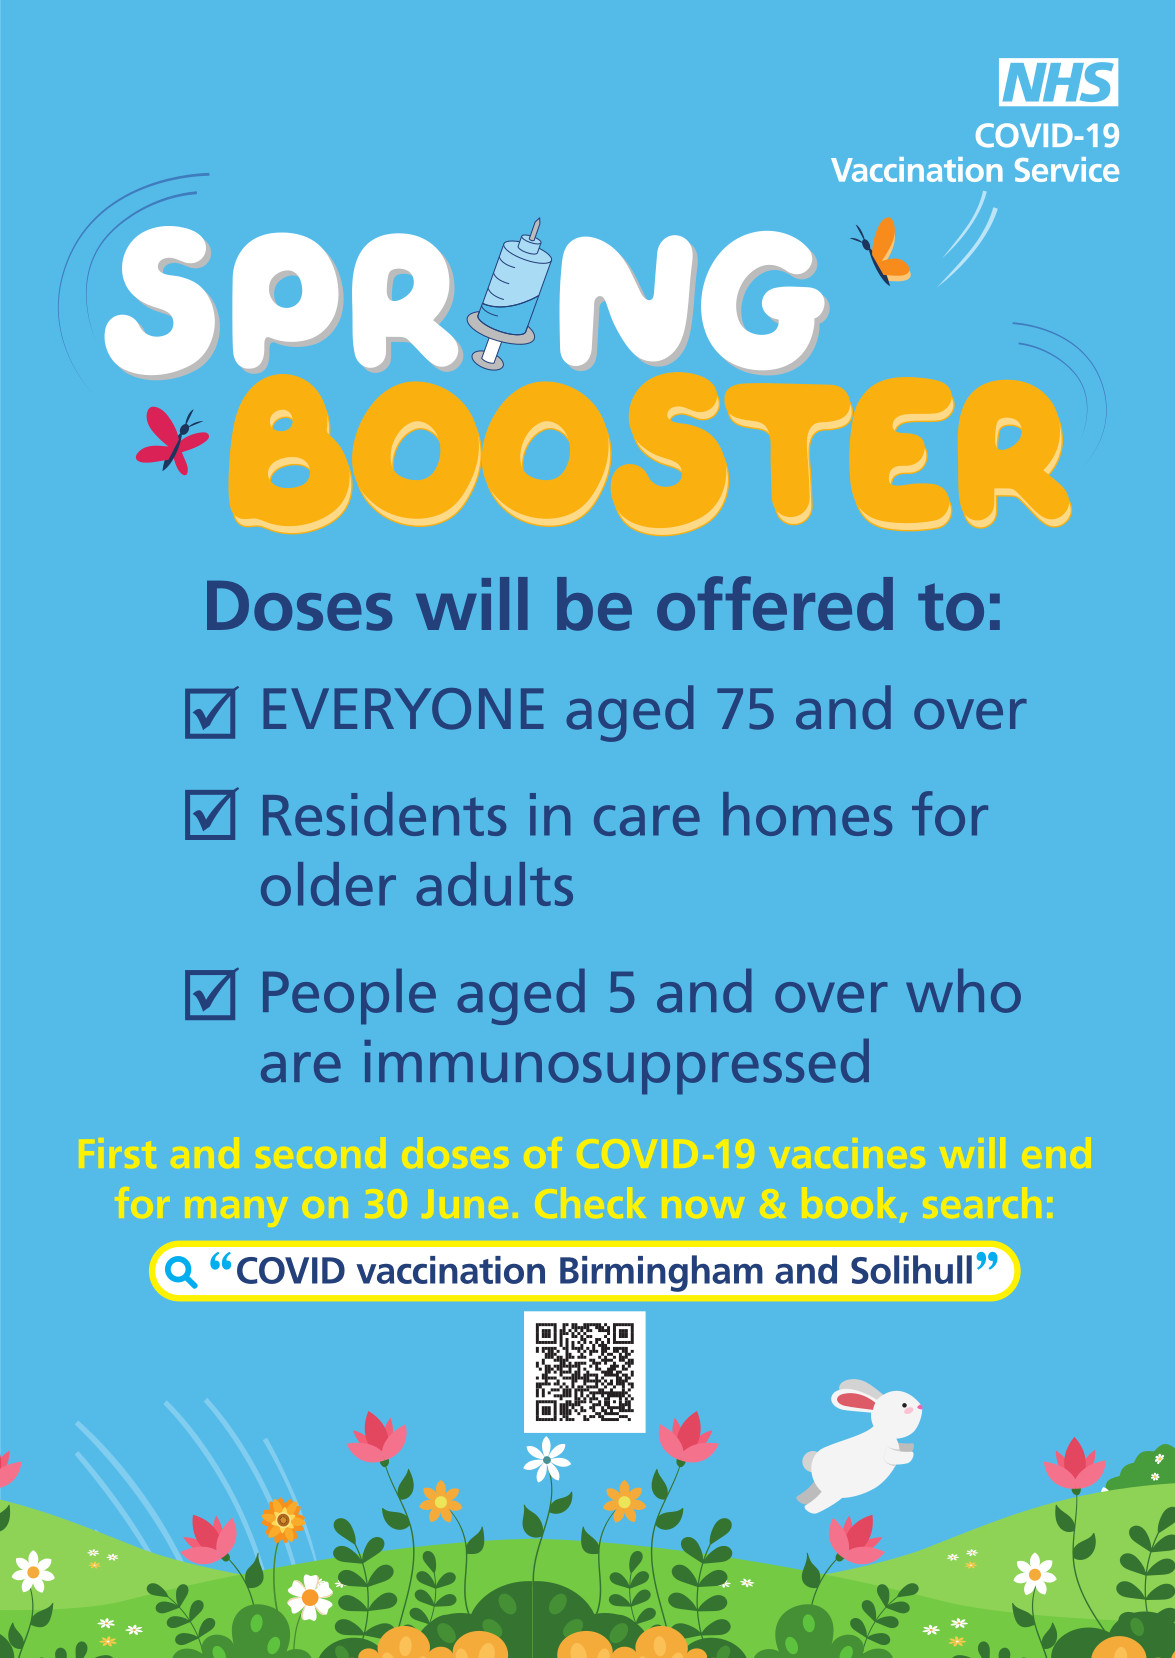 COVID-19 spring 2023 booster vaccination dose information - Those who are eligible for a COVID vaccination can book using the NHS App or visit nhs.uk/CovidVaccination  or call 119 for free.